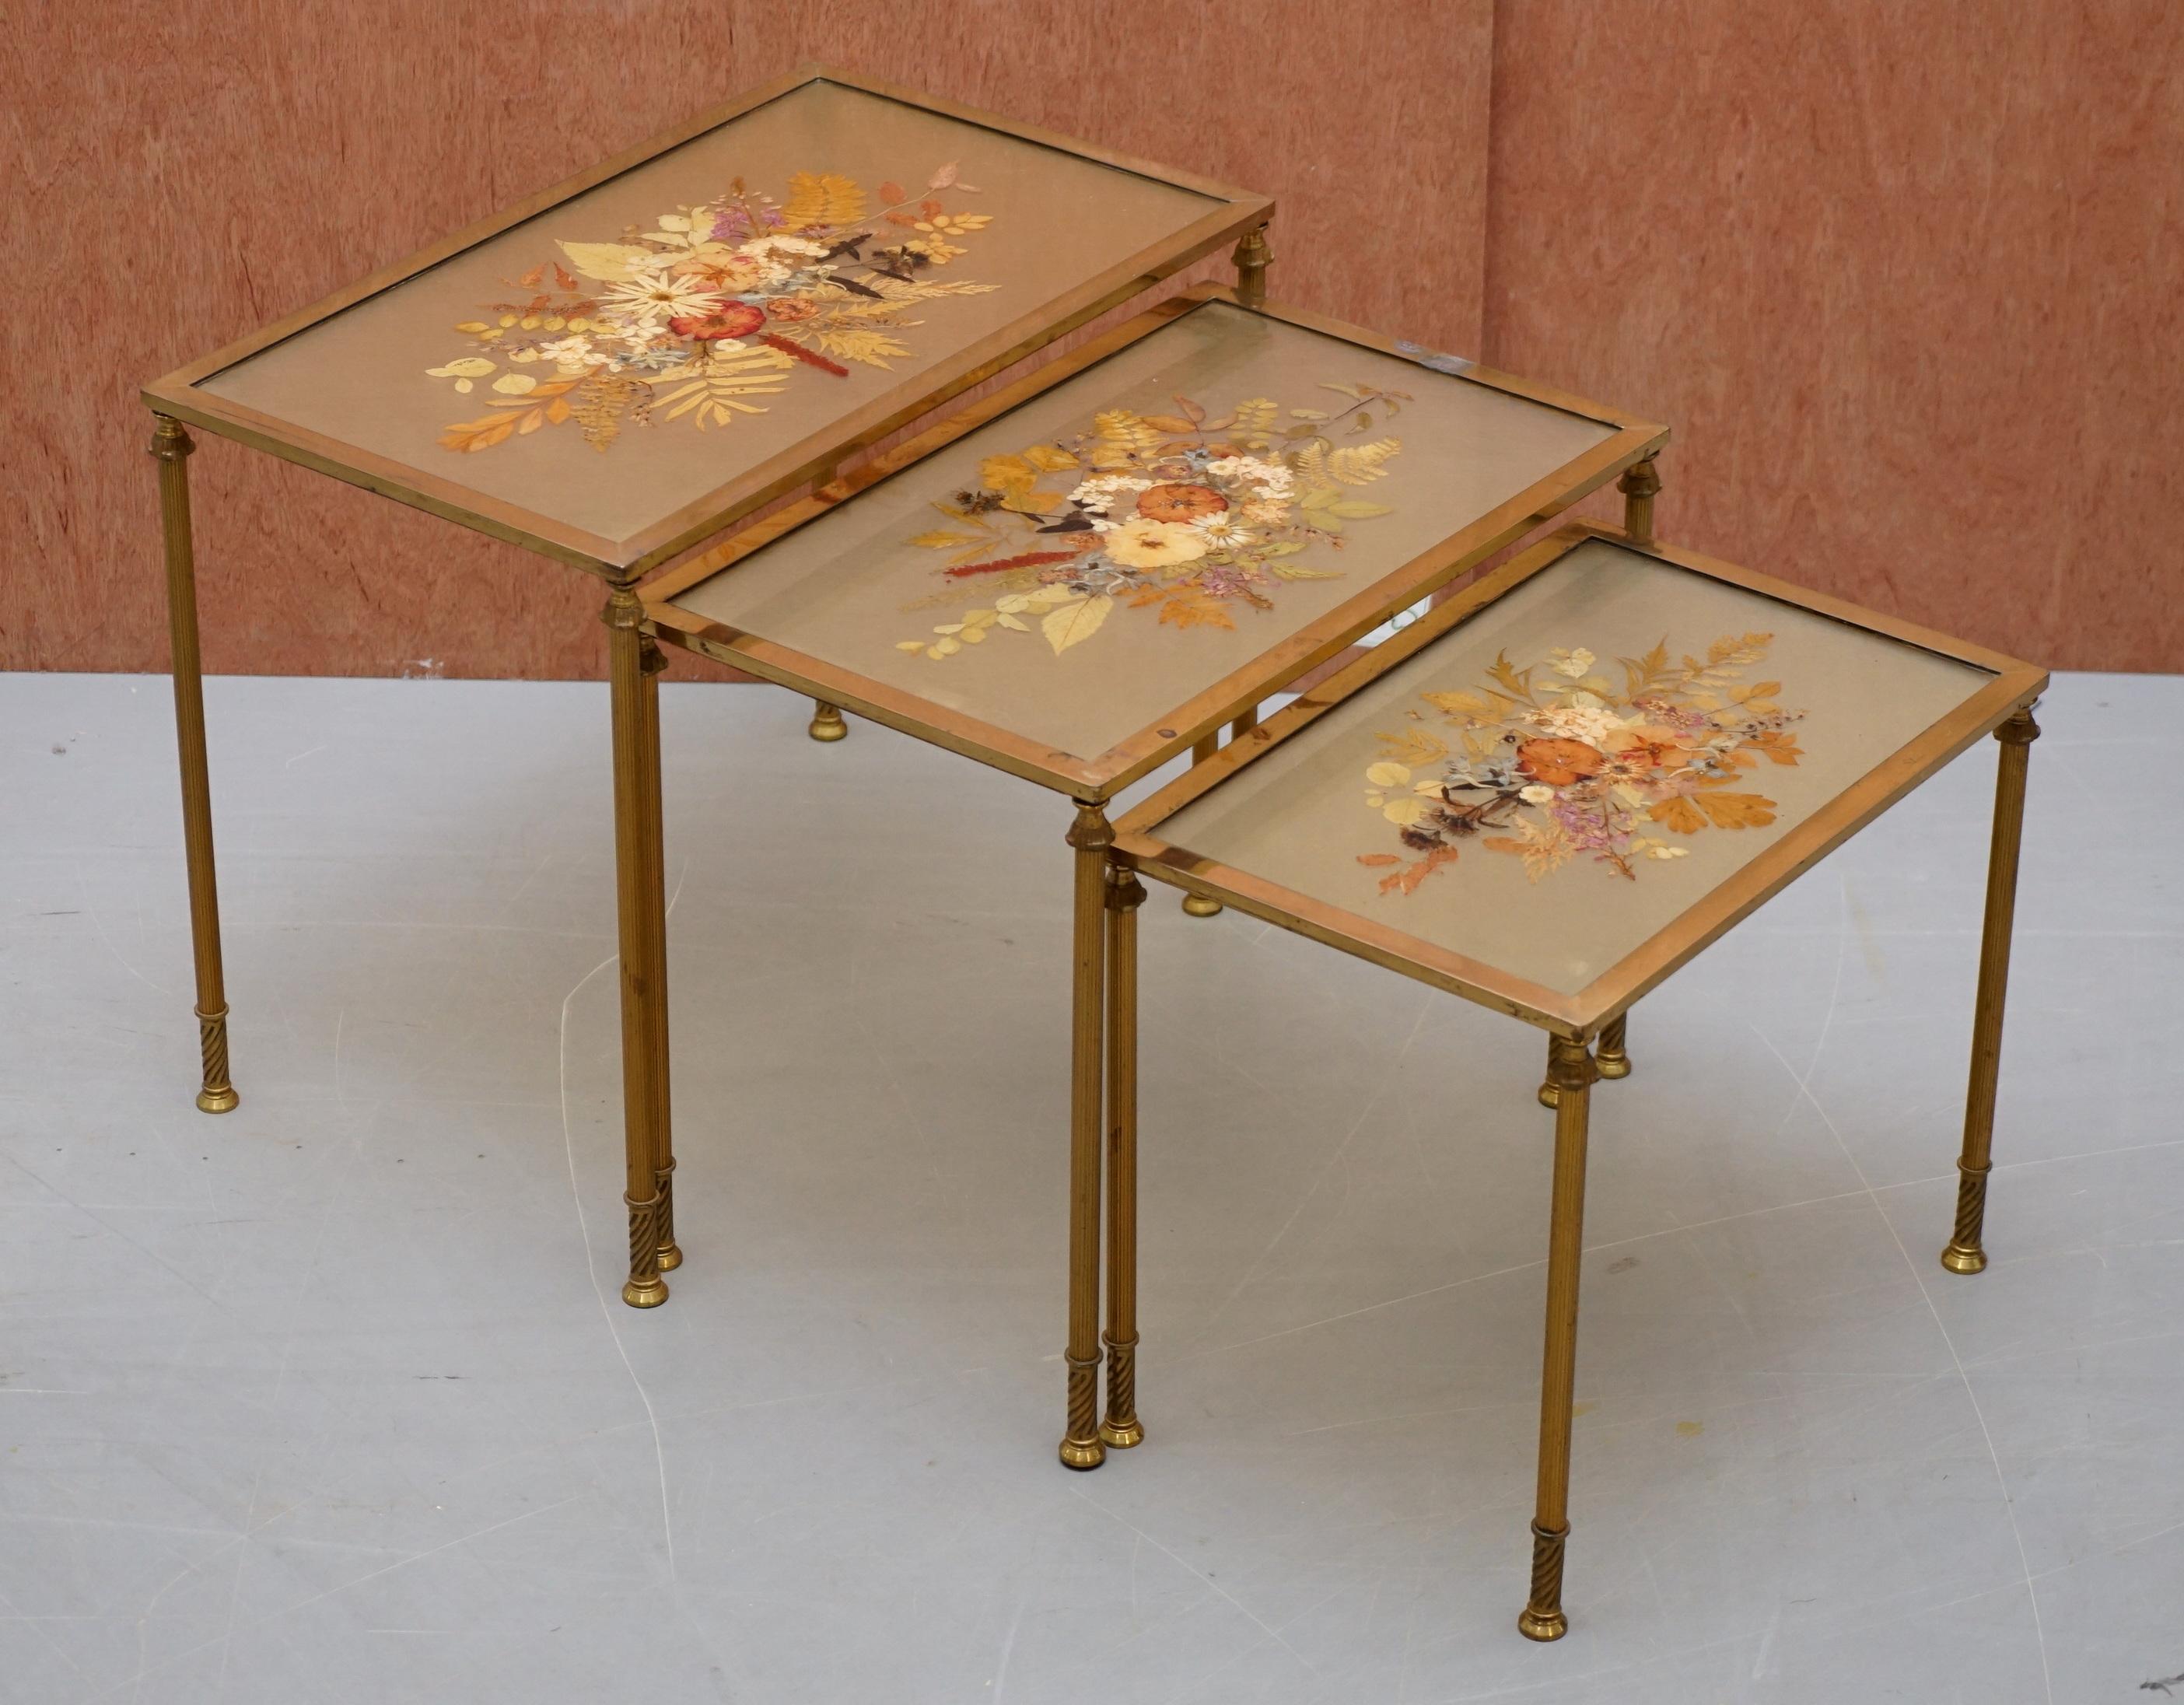 We are delighted to offer for sale this rare and collectable nest of three French pressed flower tables with bronzed frames

I have never seen tables like this before, they have the most wonderful pressed flower tops which have been set in some